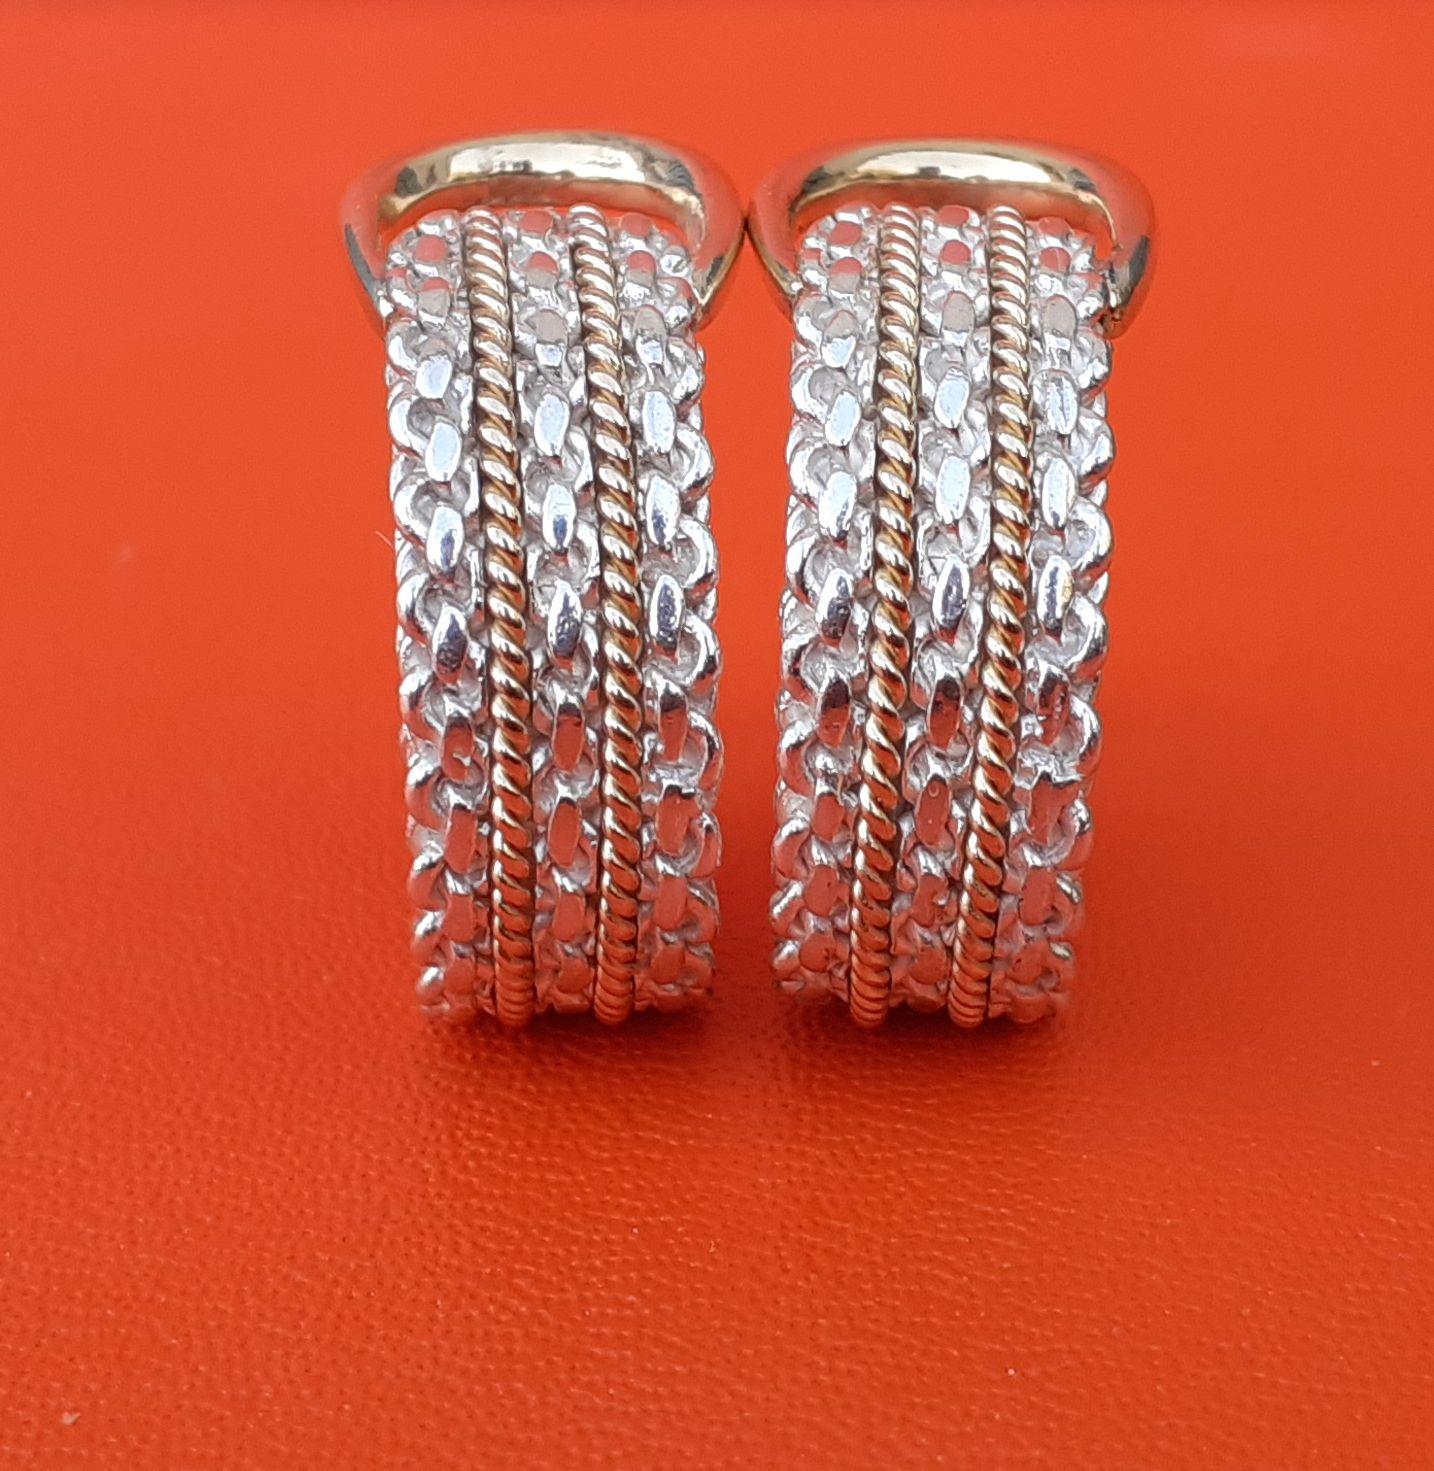 Absolutely Gorgeous Authentic Hermès Earrings

Pattern: Silver chain enhanced with 2 twisted yellow gold threads

The upper loop is in yellow gold

Clip-on earrings, will fit non pierced ears

Made of Silver and Yellow Gold 18K

Colorways: Silver,